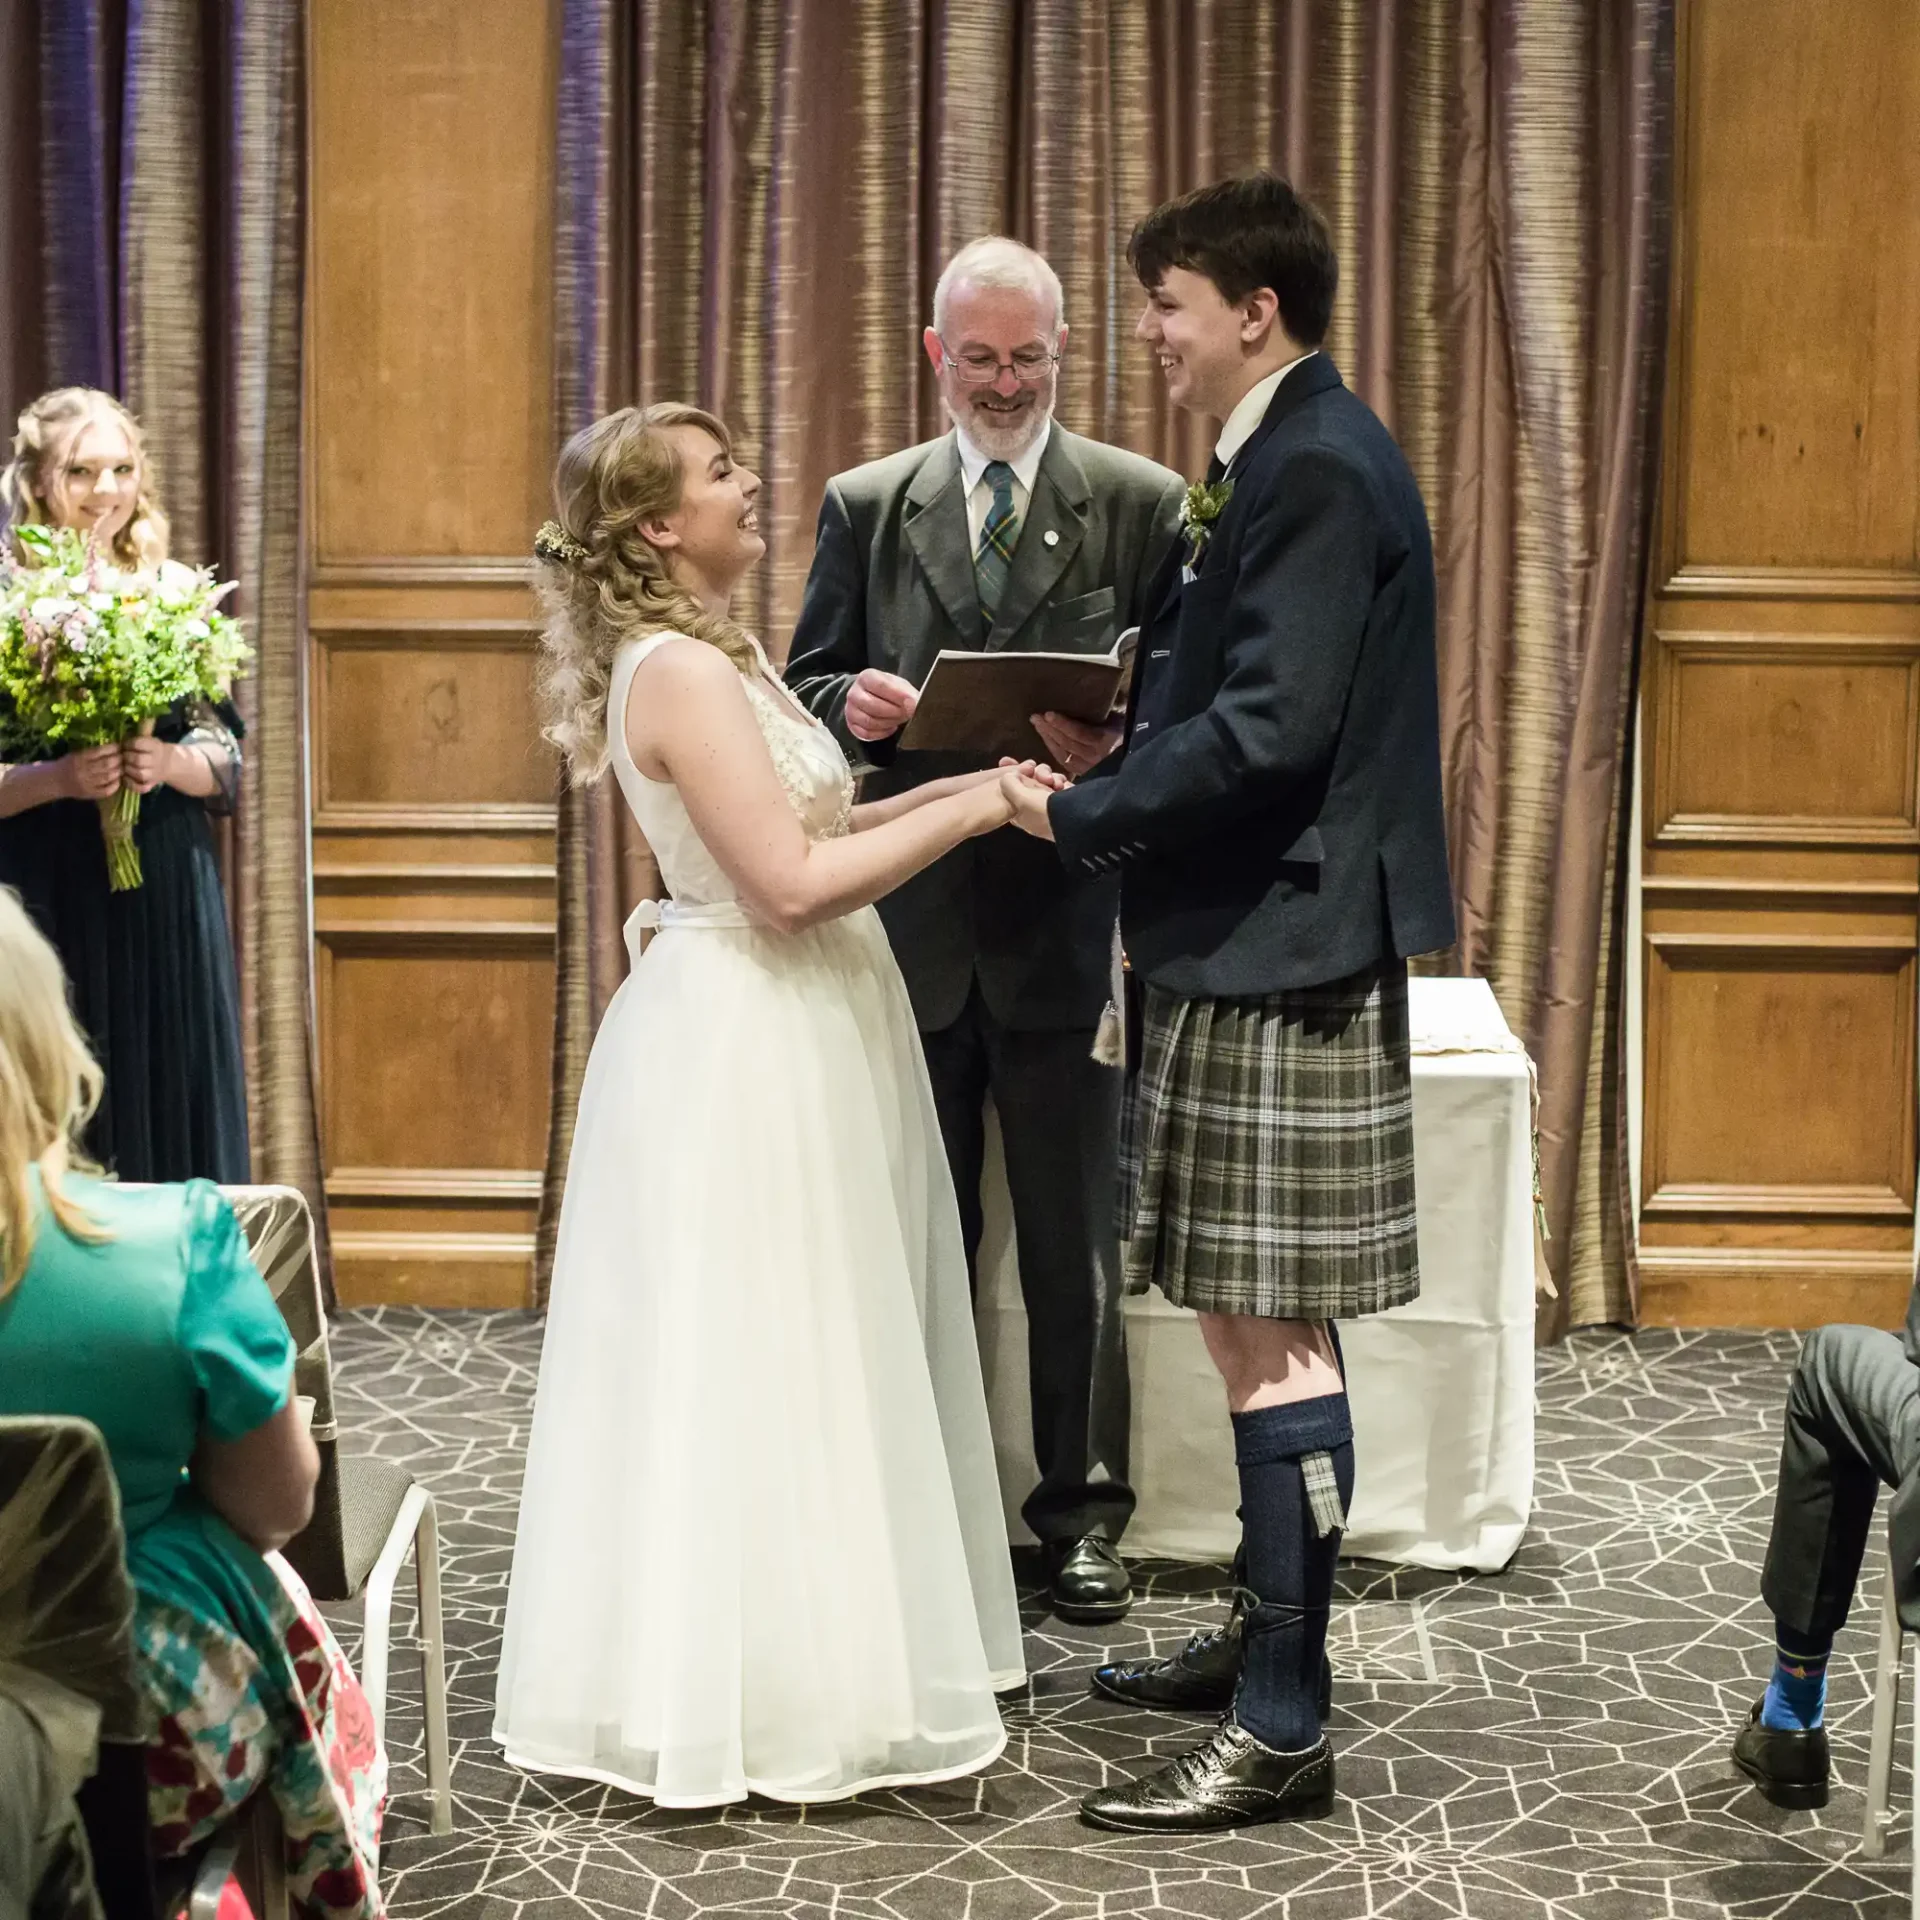 A bride and groom exchange vows, smiling joyfully at each other, while an officiant oversees the ceremony in a hall with guests watching.